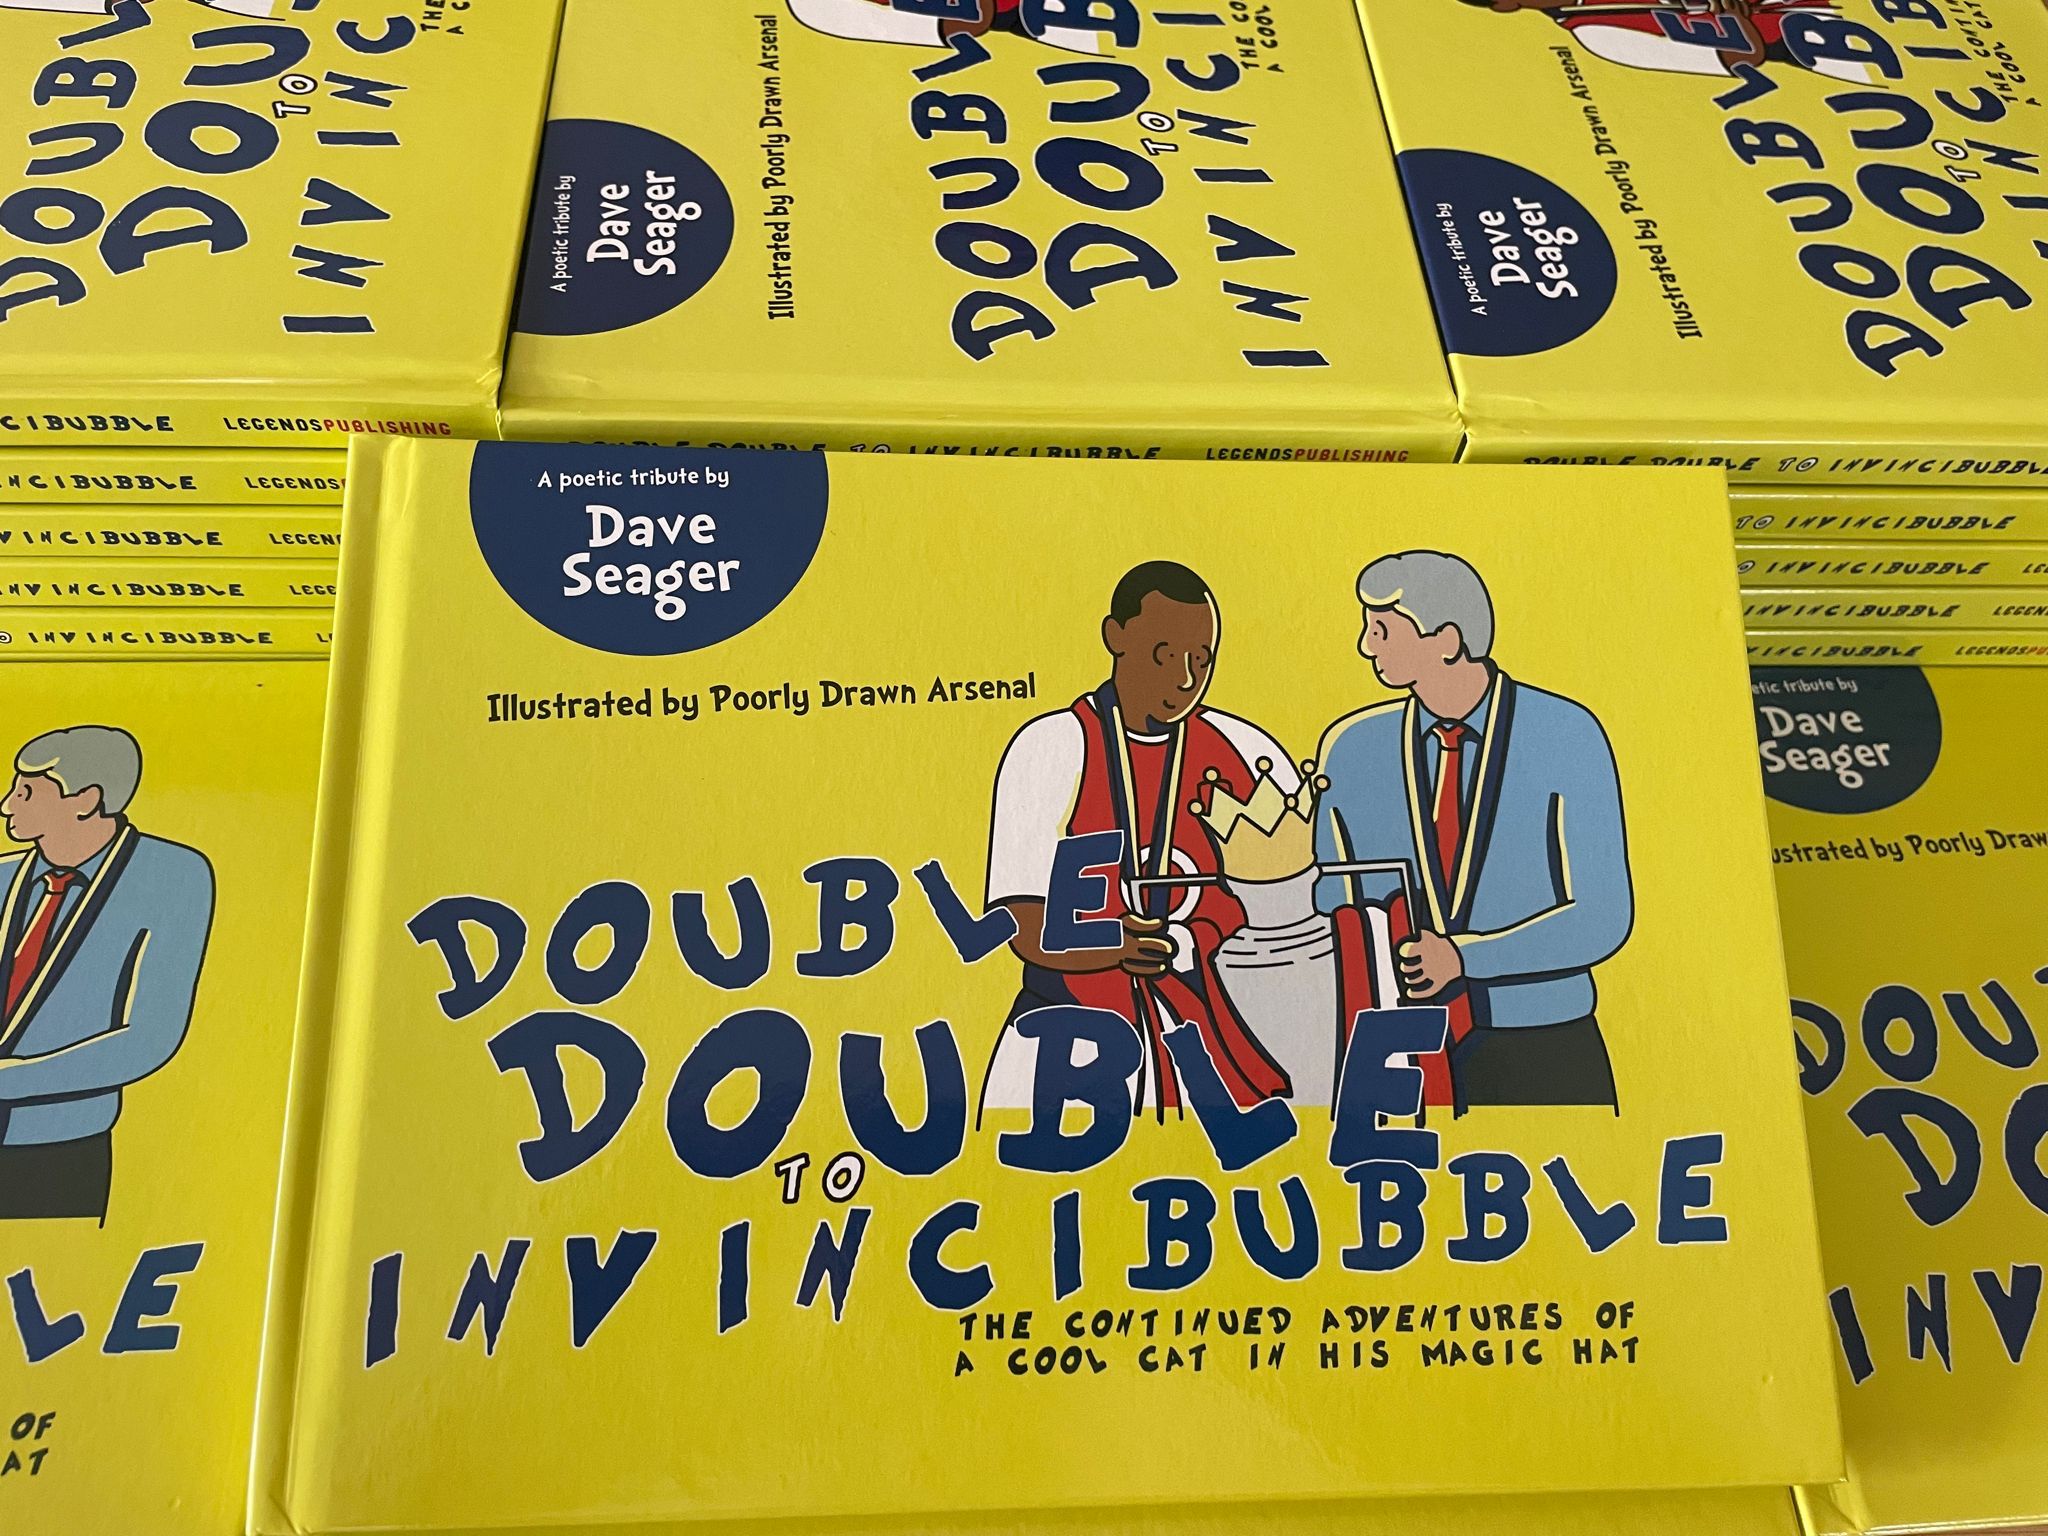 SHIP ONLY, signed "From Double Double to Invincibubble" by Dave Seager & Illustrated by Poorly Drawn Arsenal